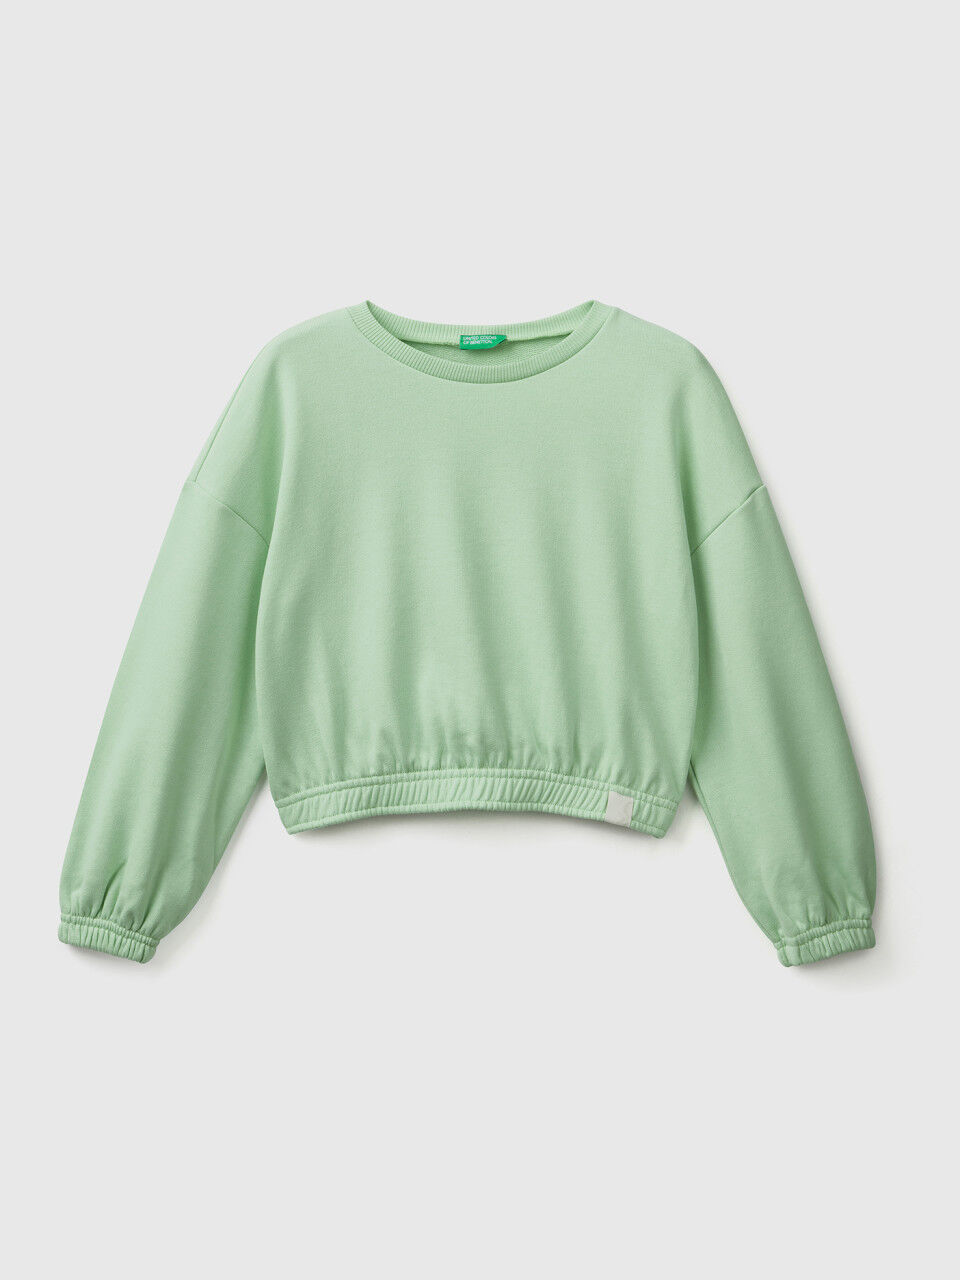 Cropped sweatshirt in recycled fabric